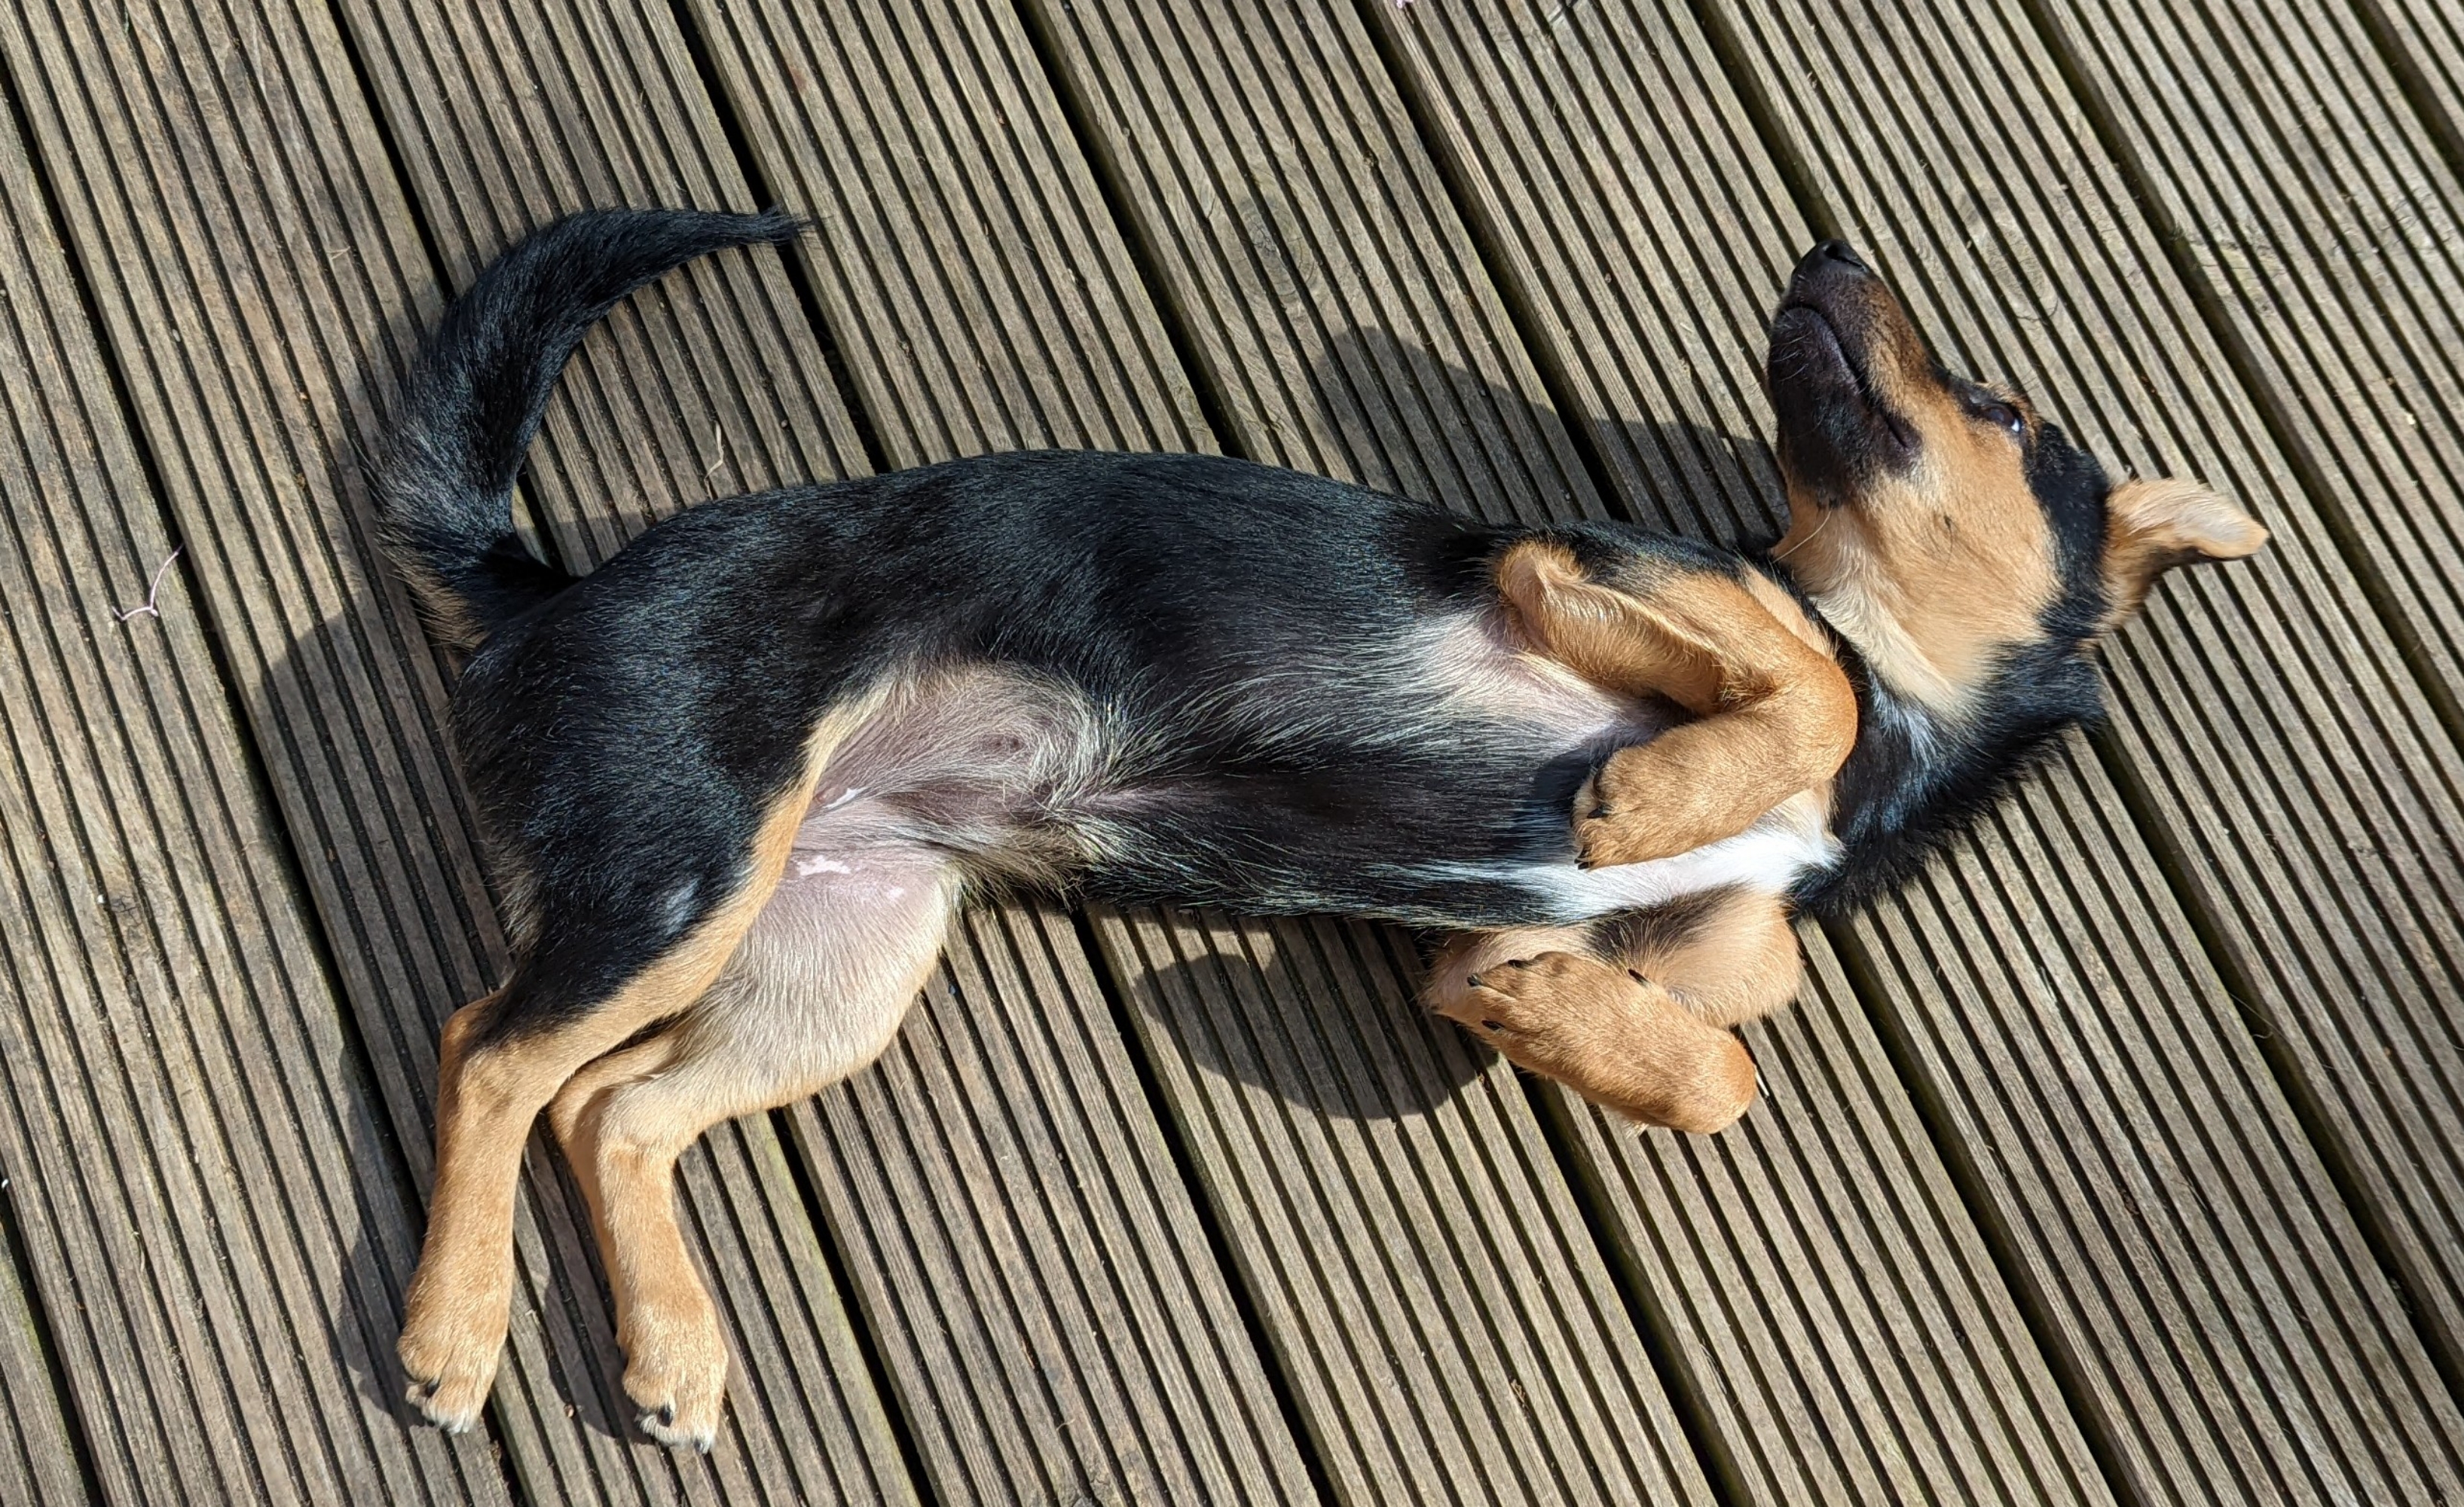 Cookie the dog lying on the decking, with her belly showing, and the sunlight warming her